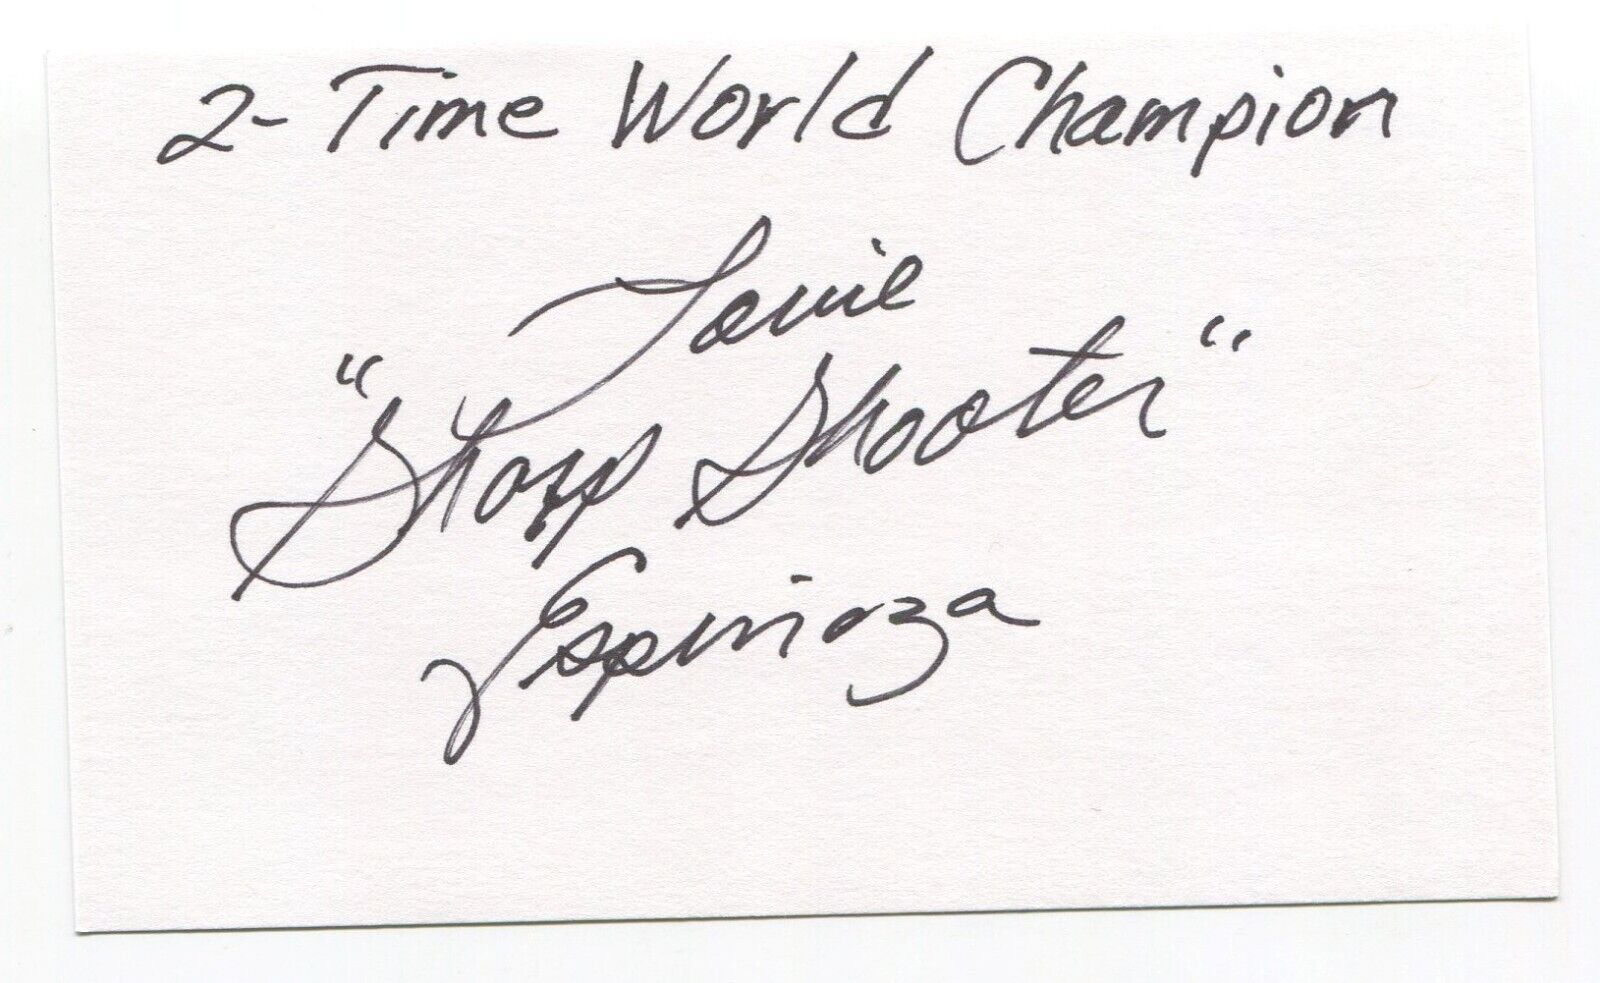 Louie Espinoza Signed 3x5 Index Card Autographed Boxer Boxing Champ